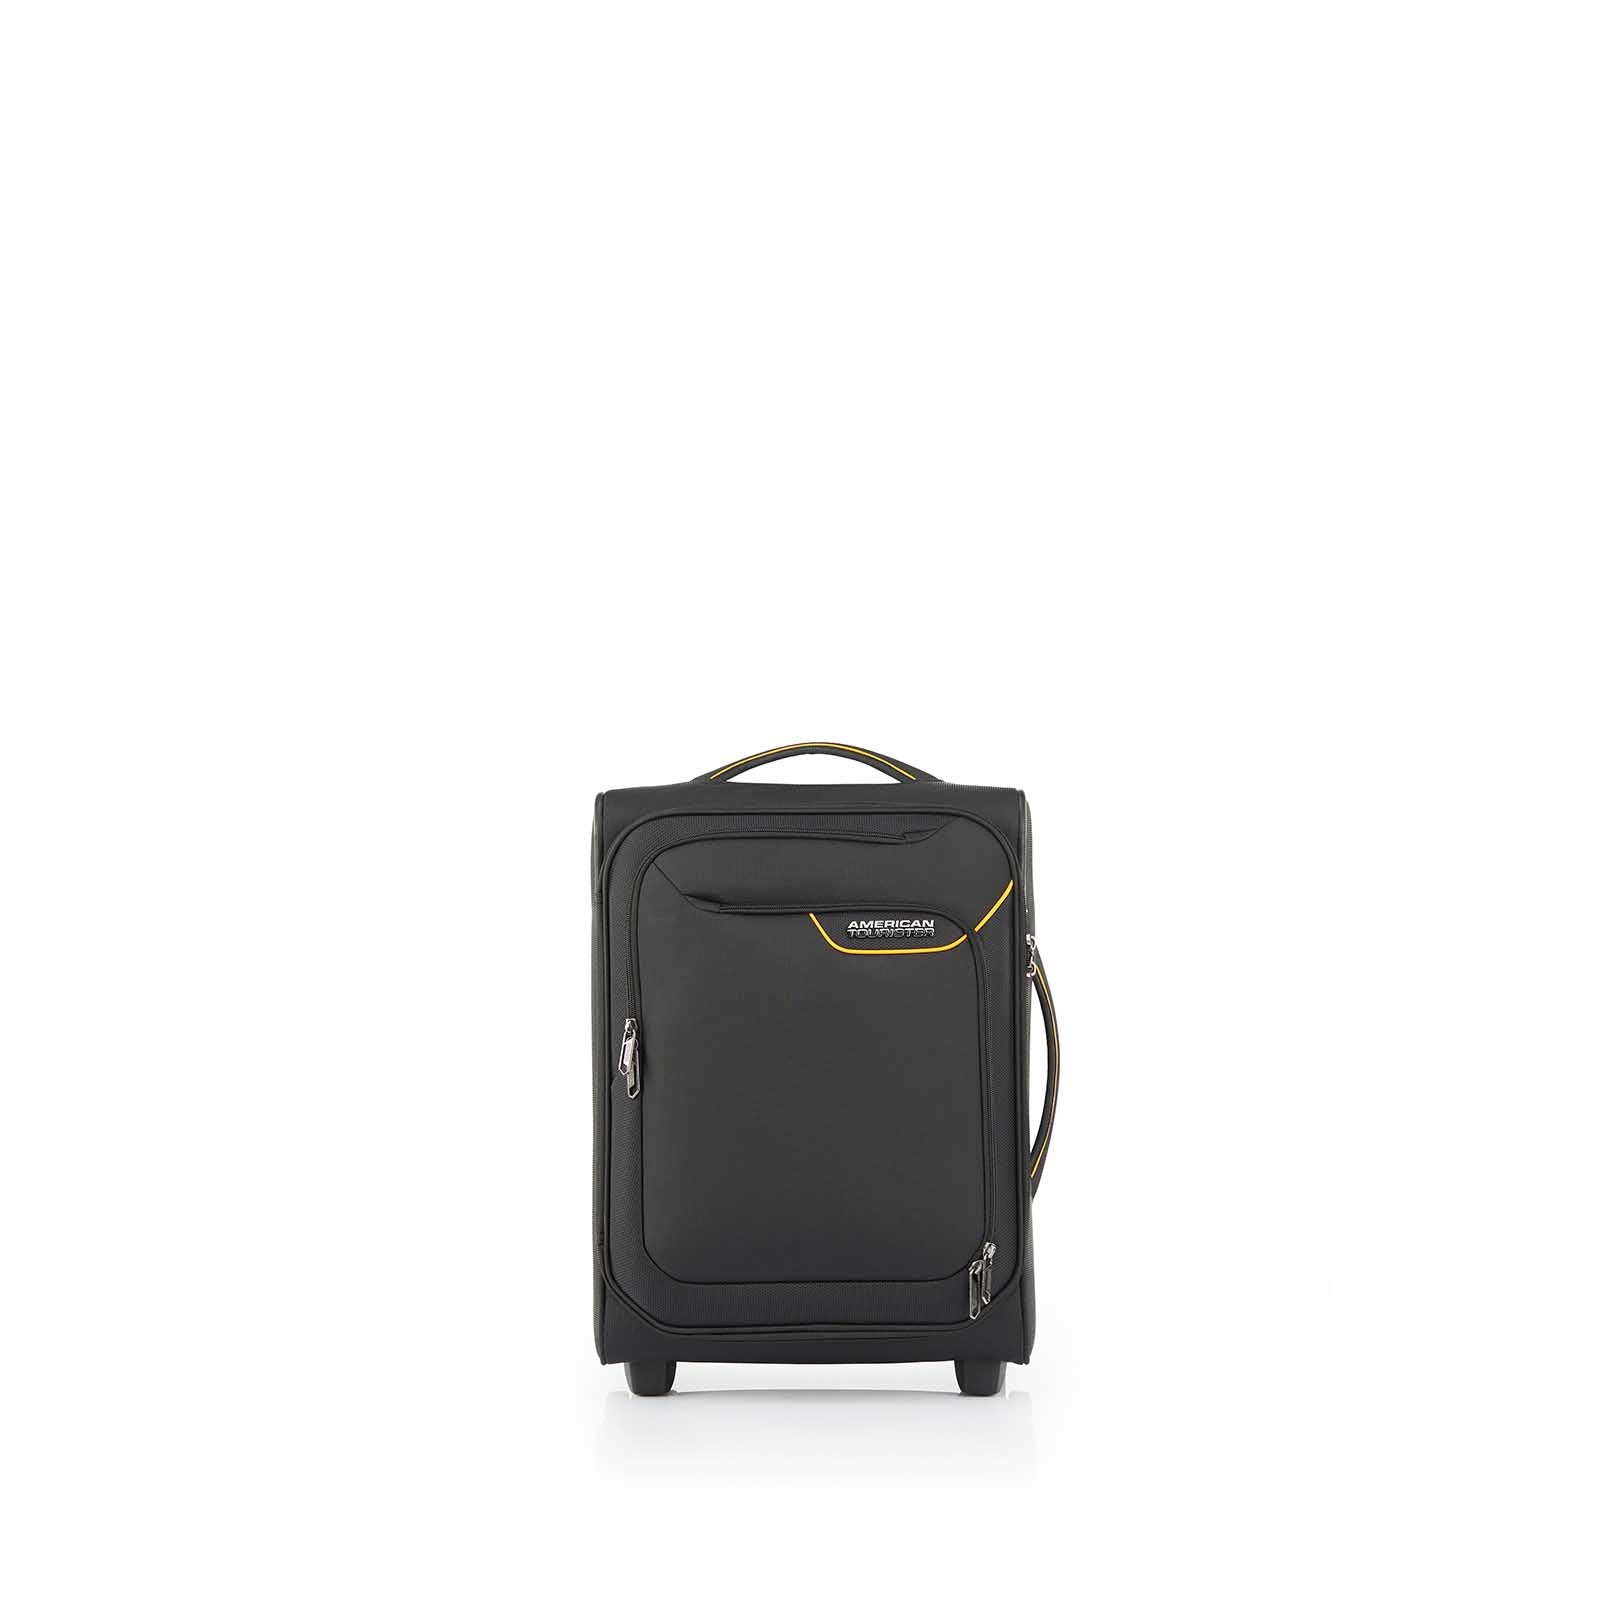 American-Tourister-Applite-4-Eco-50cm-Carry-On-Suitcase-Black-Mustard-Front